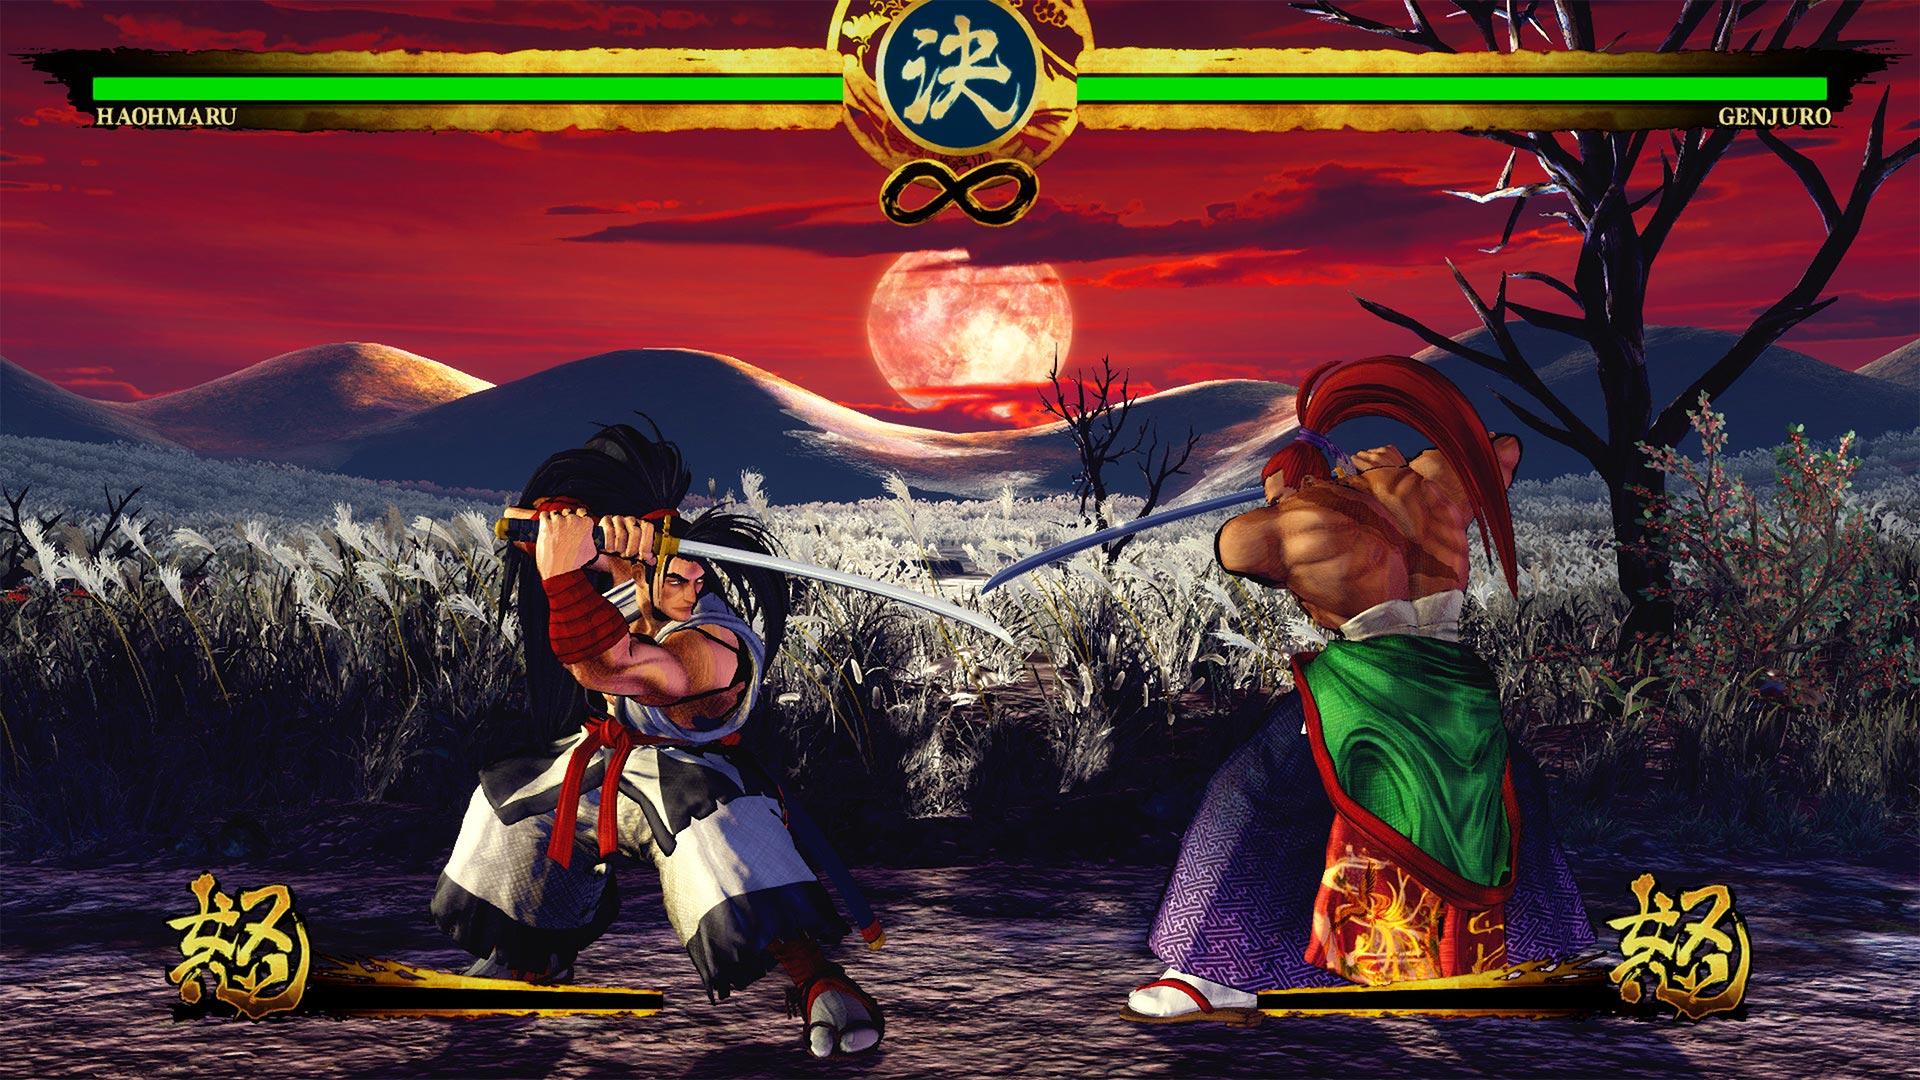 Free download The new Samurai Shodown is coming this June GameAxis